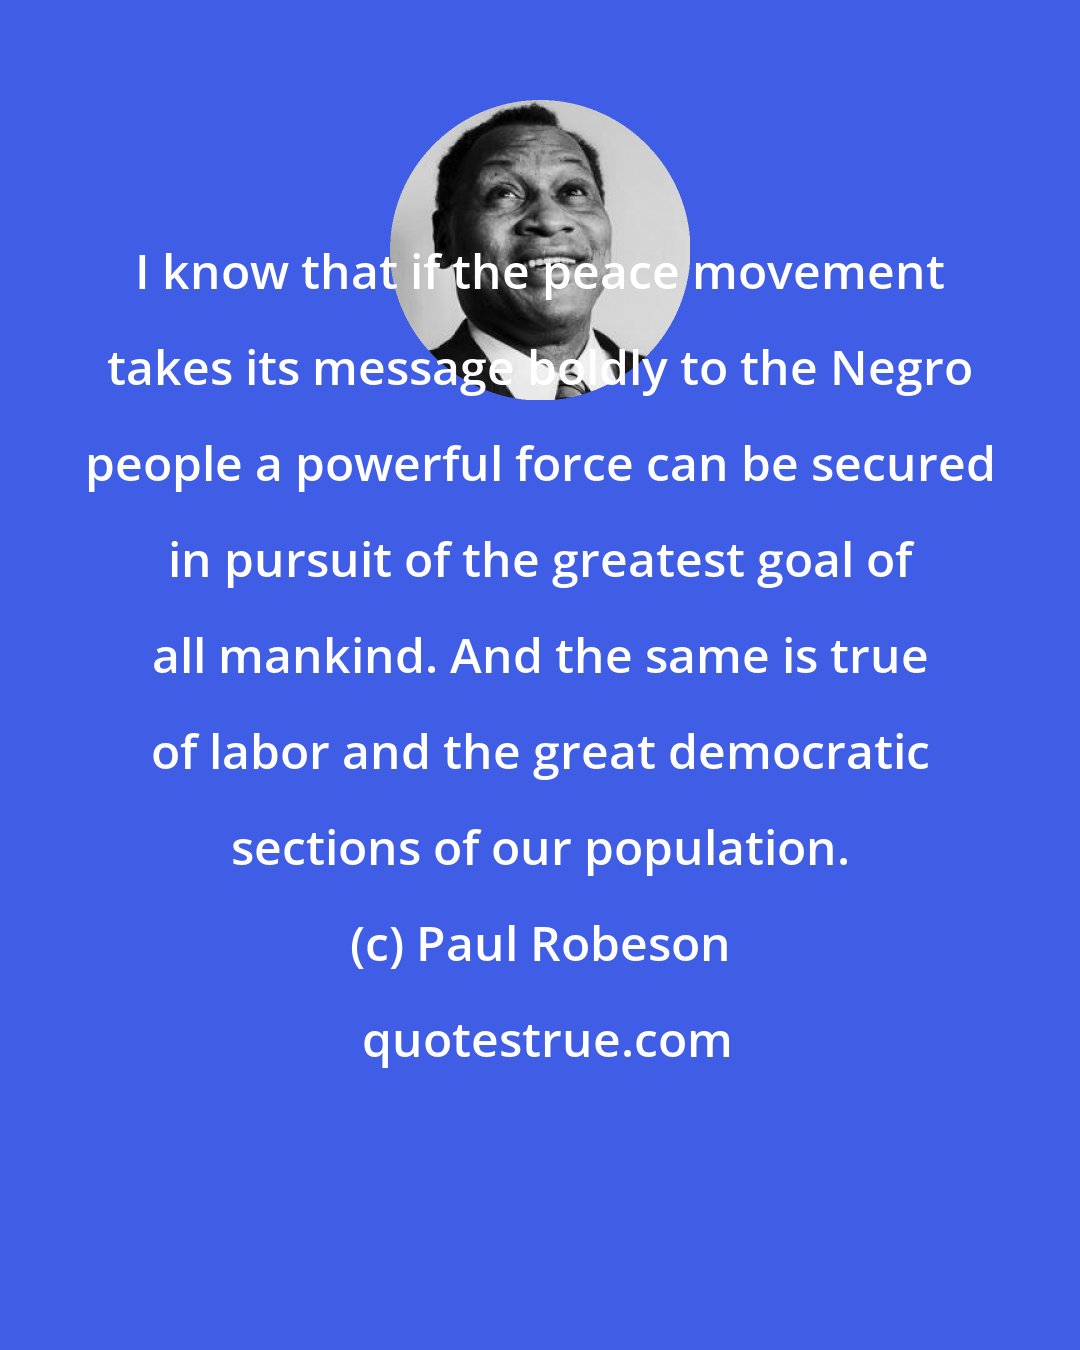 Paul Robeson: I know that if the peace movement takes its message boldly to the Negro people a powerful force can be secured in pursuit of the greatest goal of all mankind. And the same is true of labor and the great democratic sections of our population.